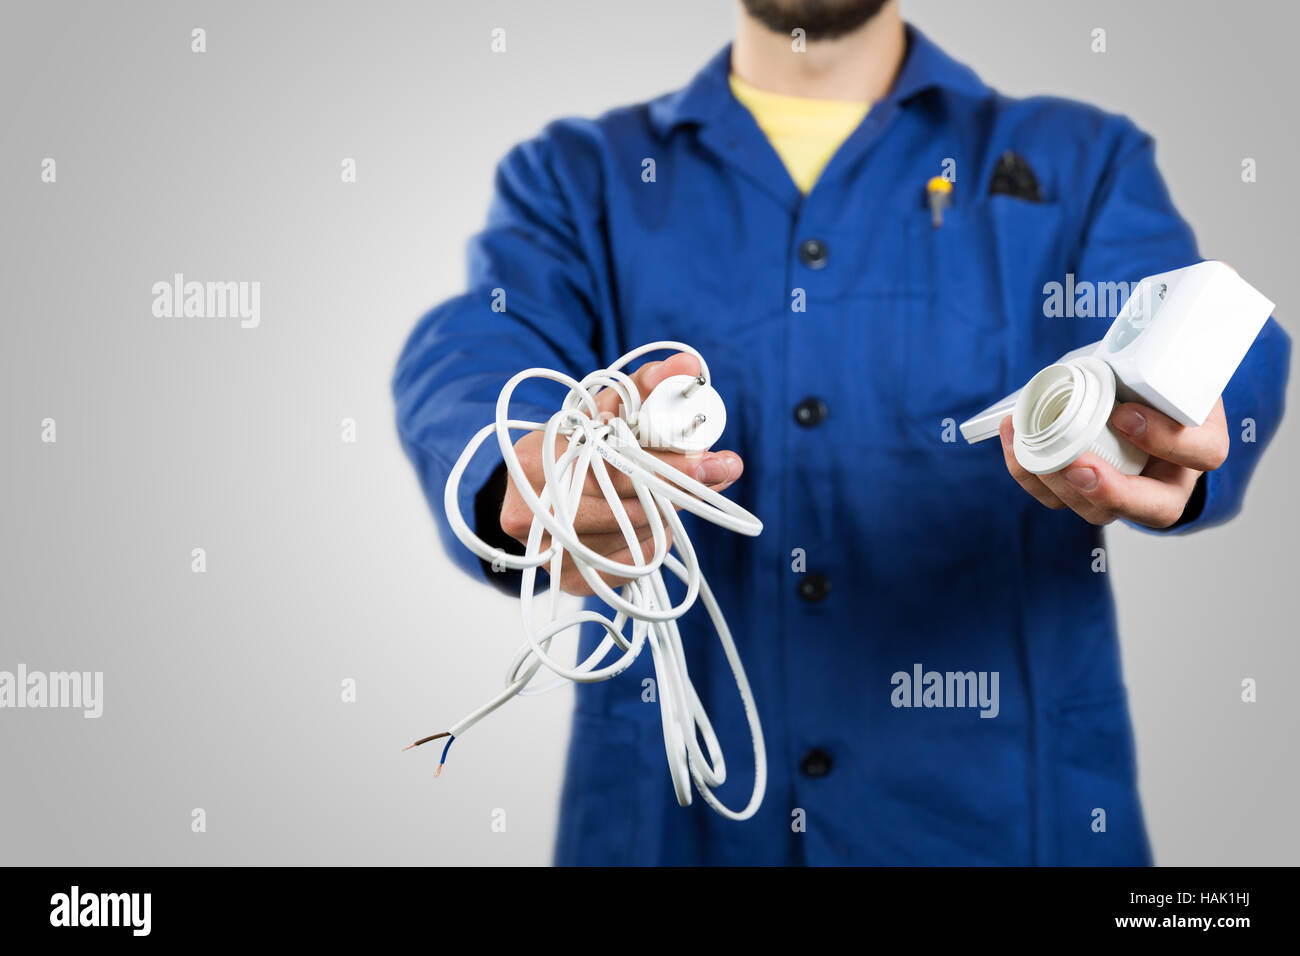 electrician with equipment in the hands isolated on gray Stock Photo